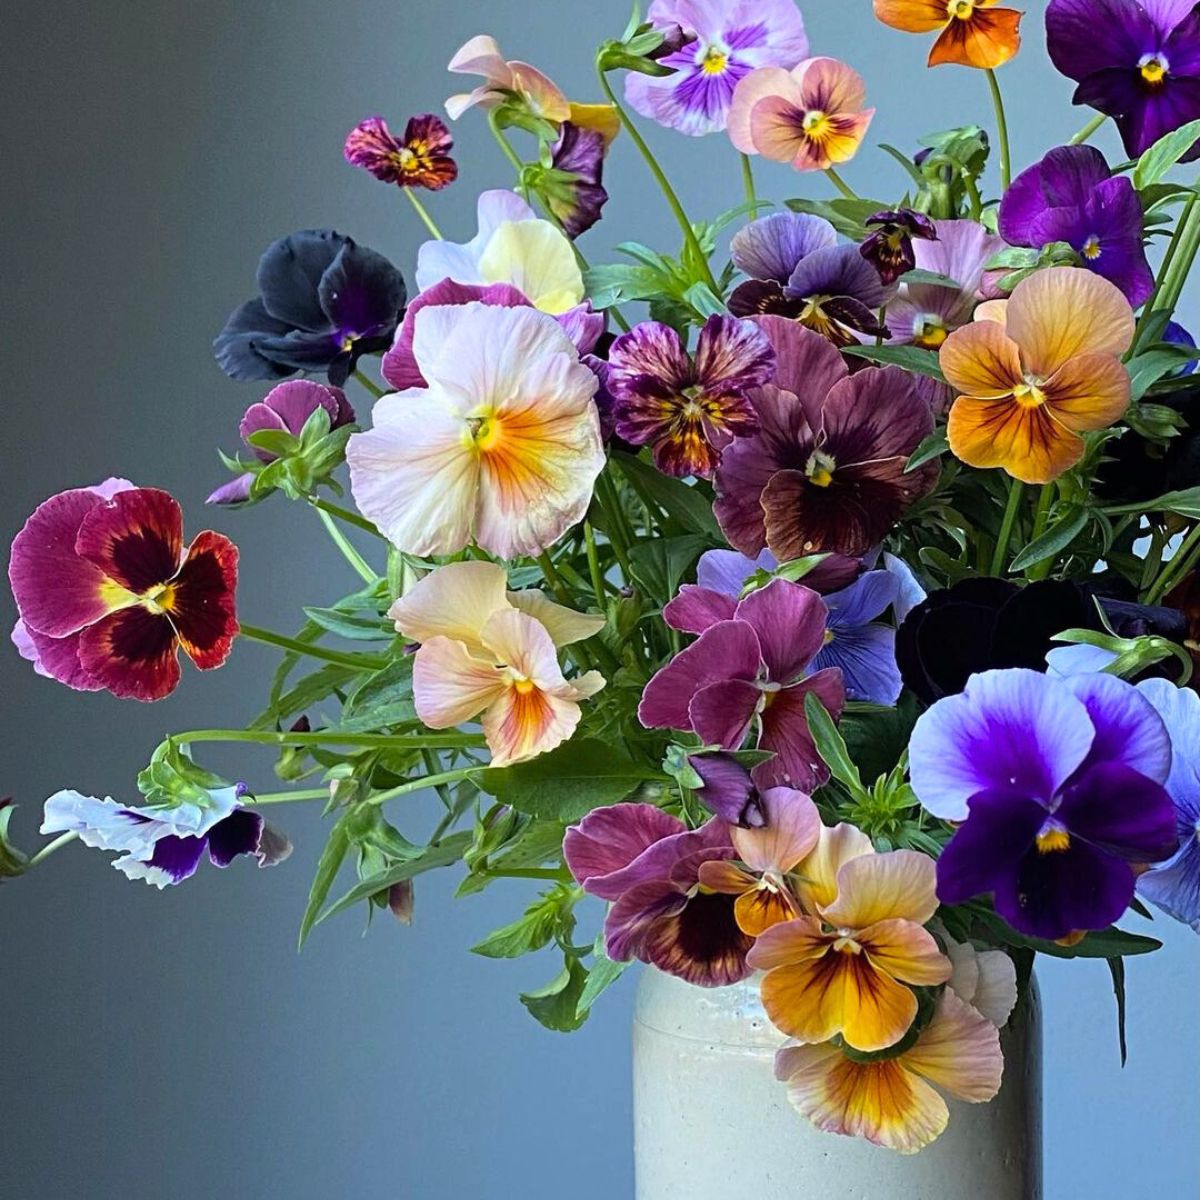 Different colored pansies